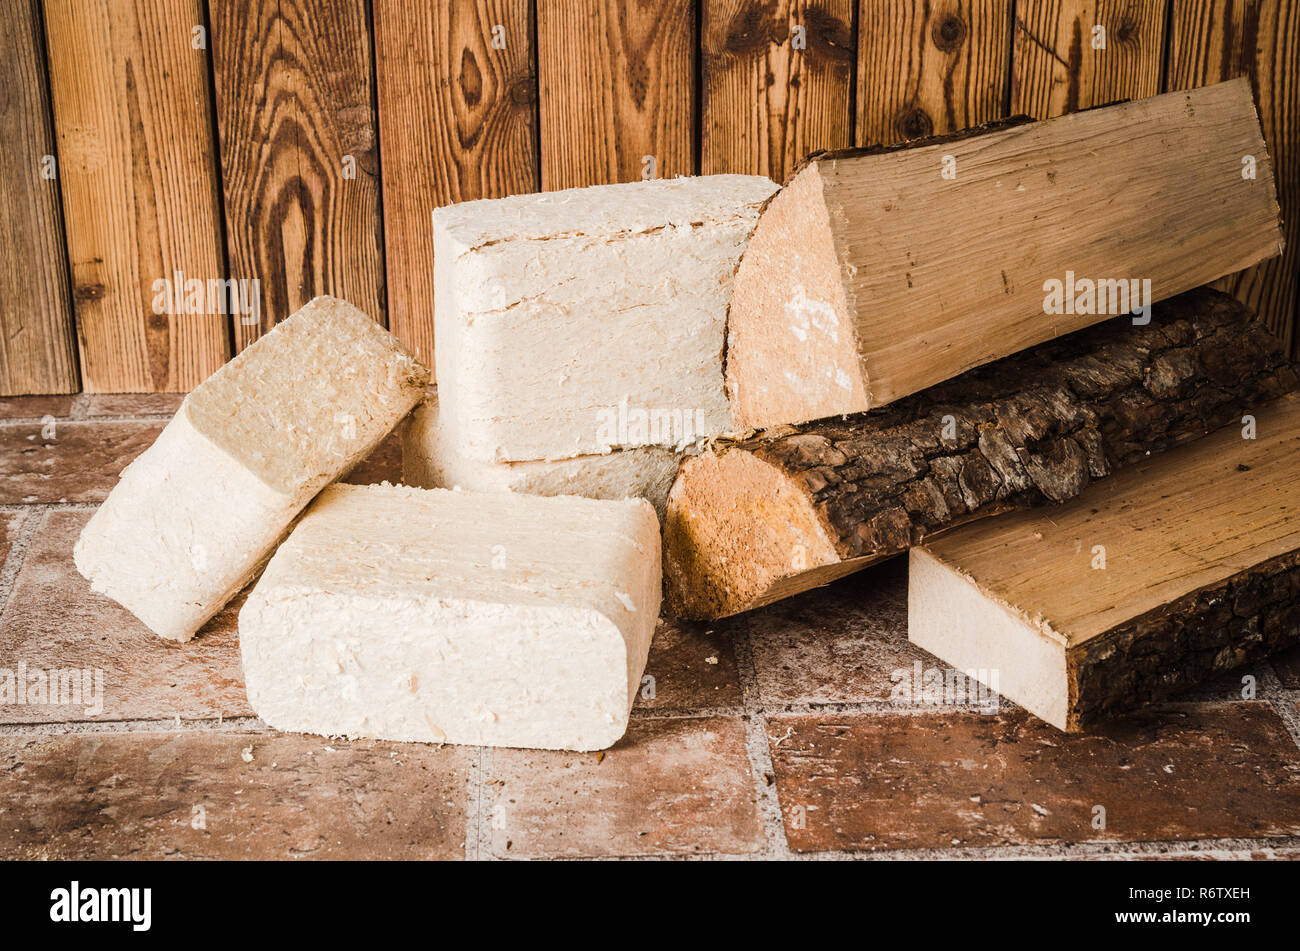 Wood briquette and firewood, close-up Stock Photo